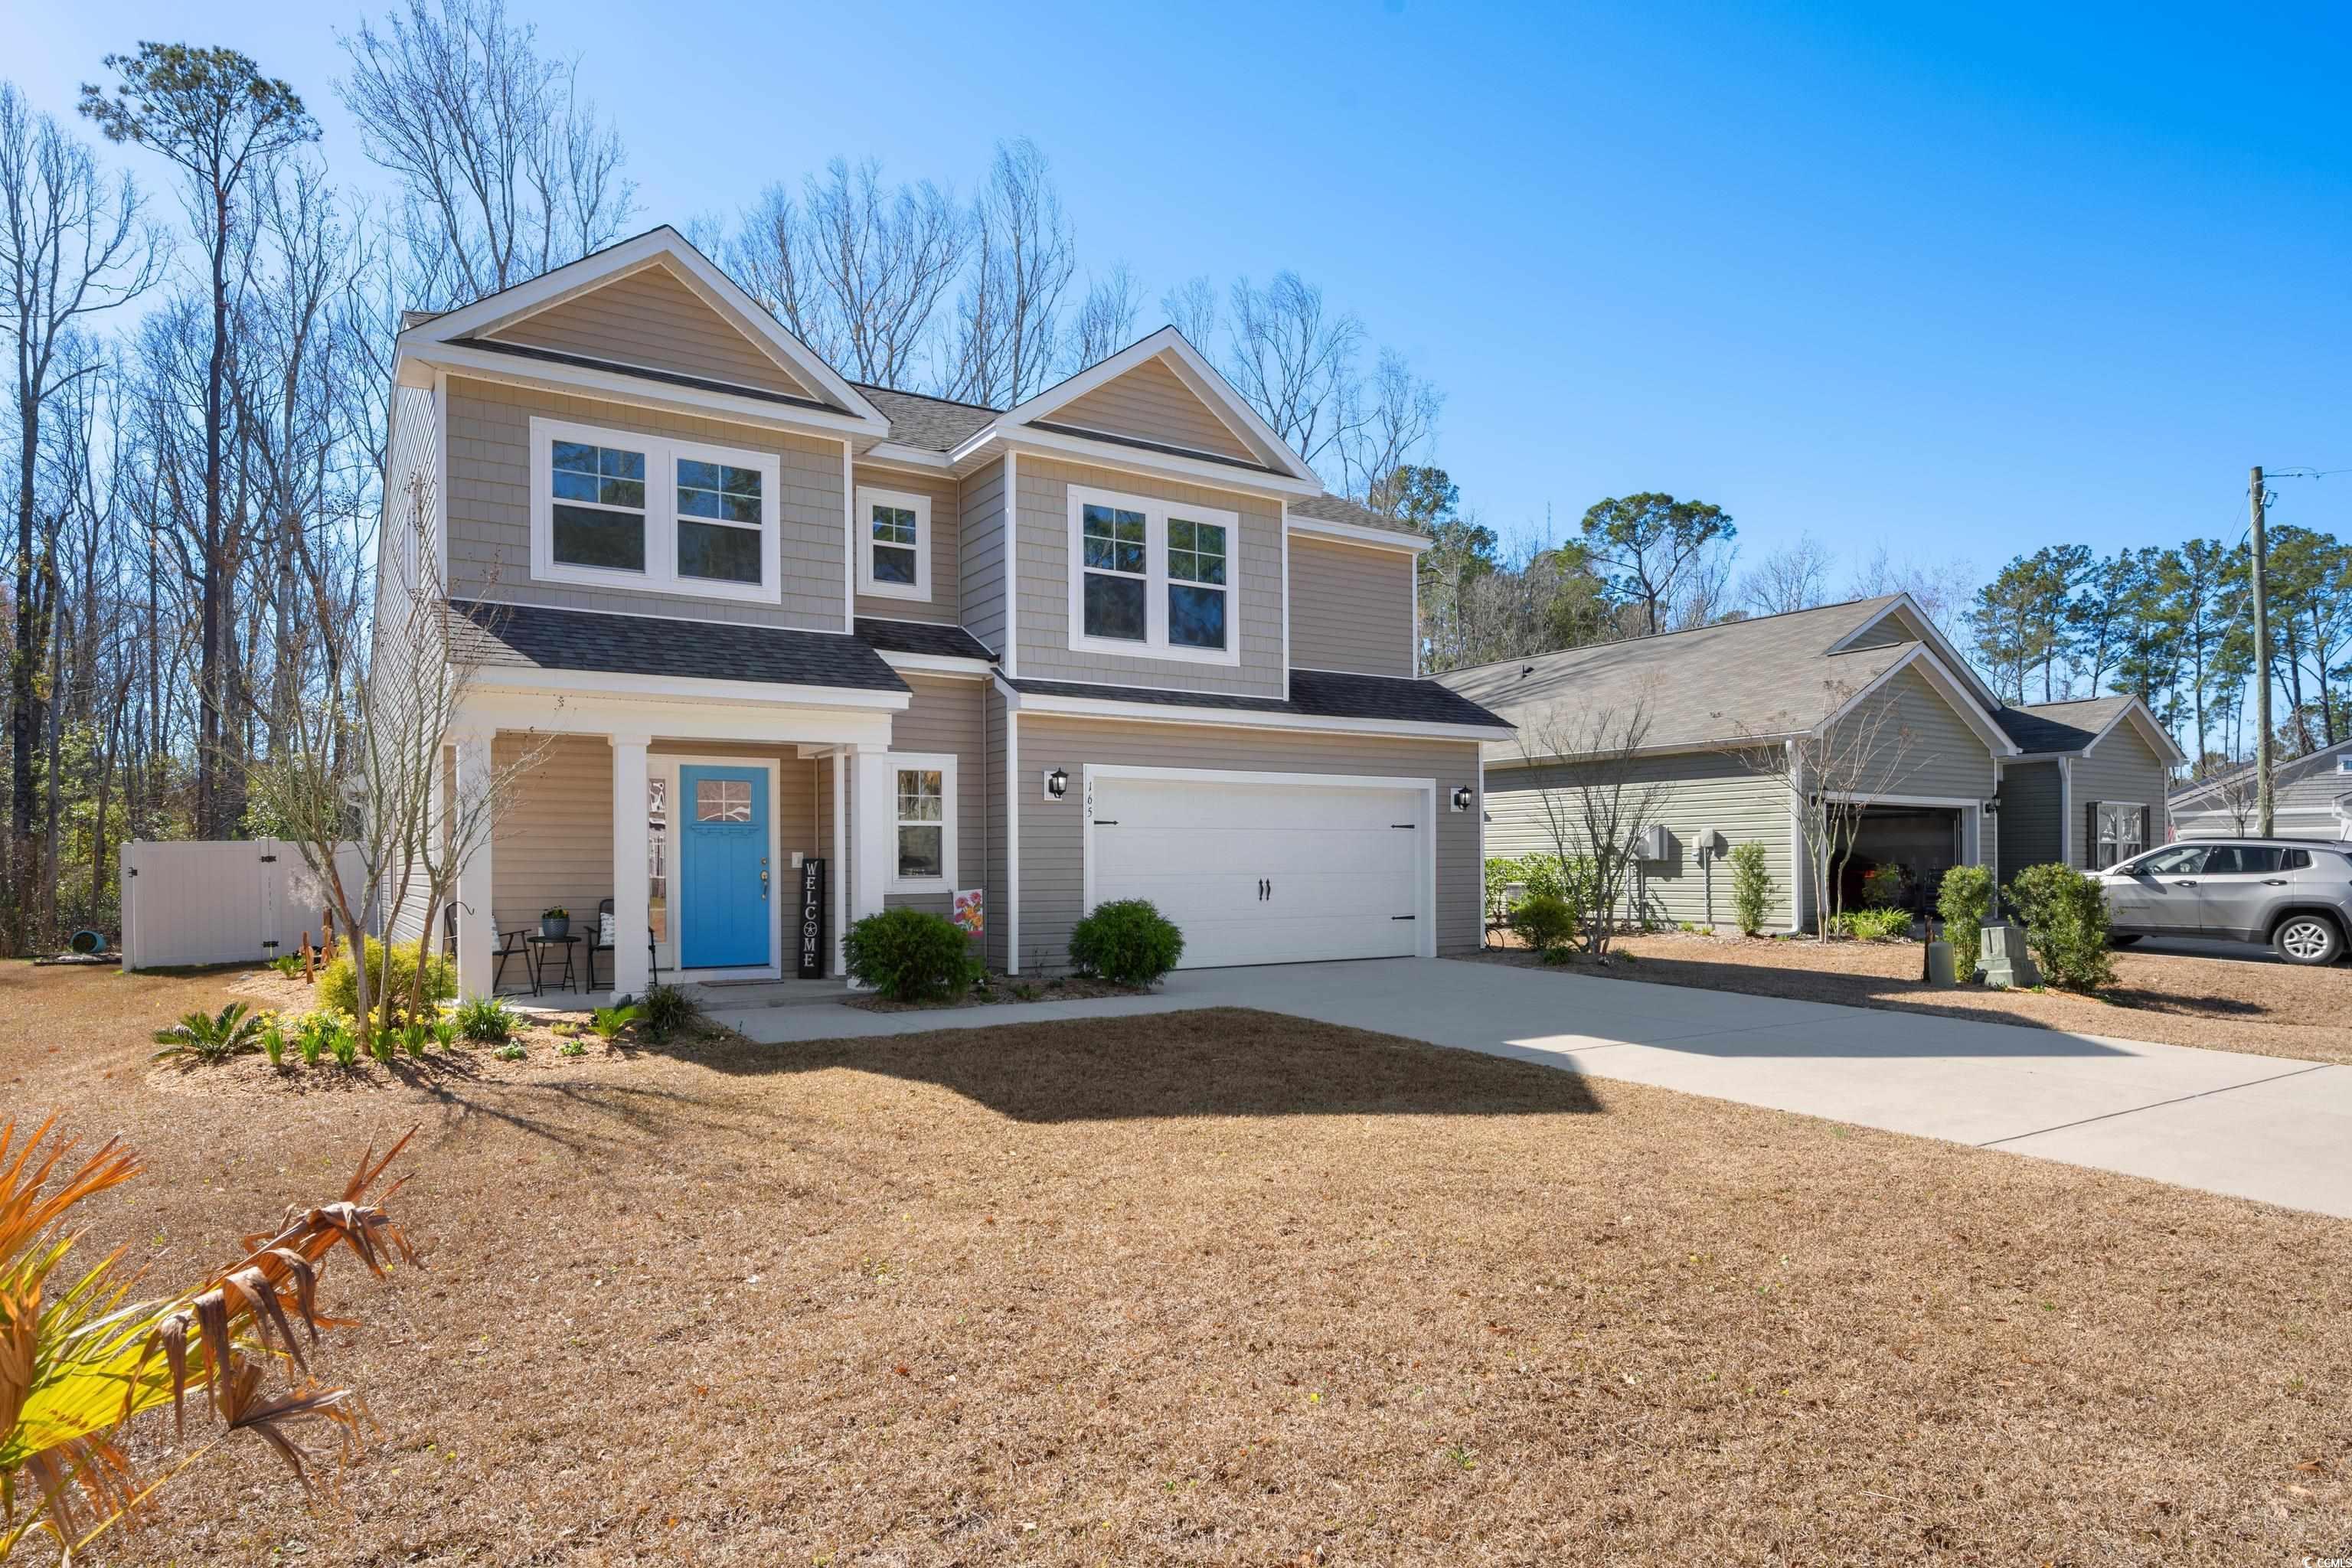 Photo one of 165 Clearwater Dr. Pawleys Island SC 29585 | MLS 2404017